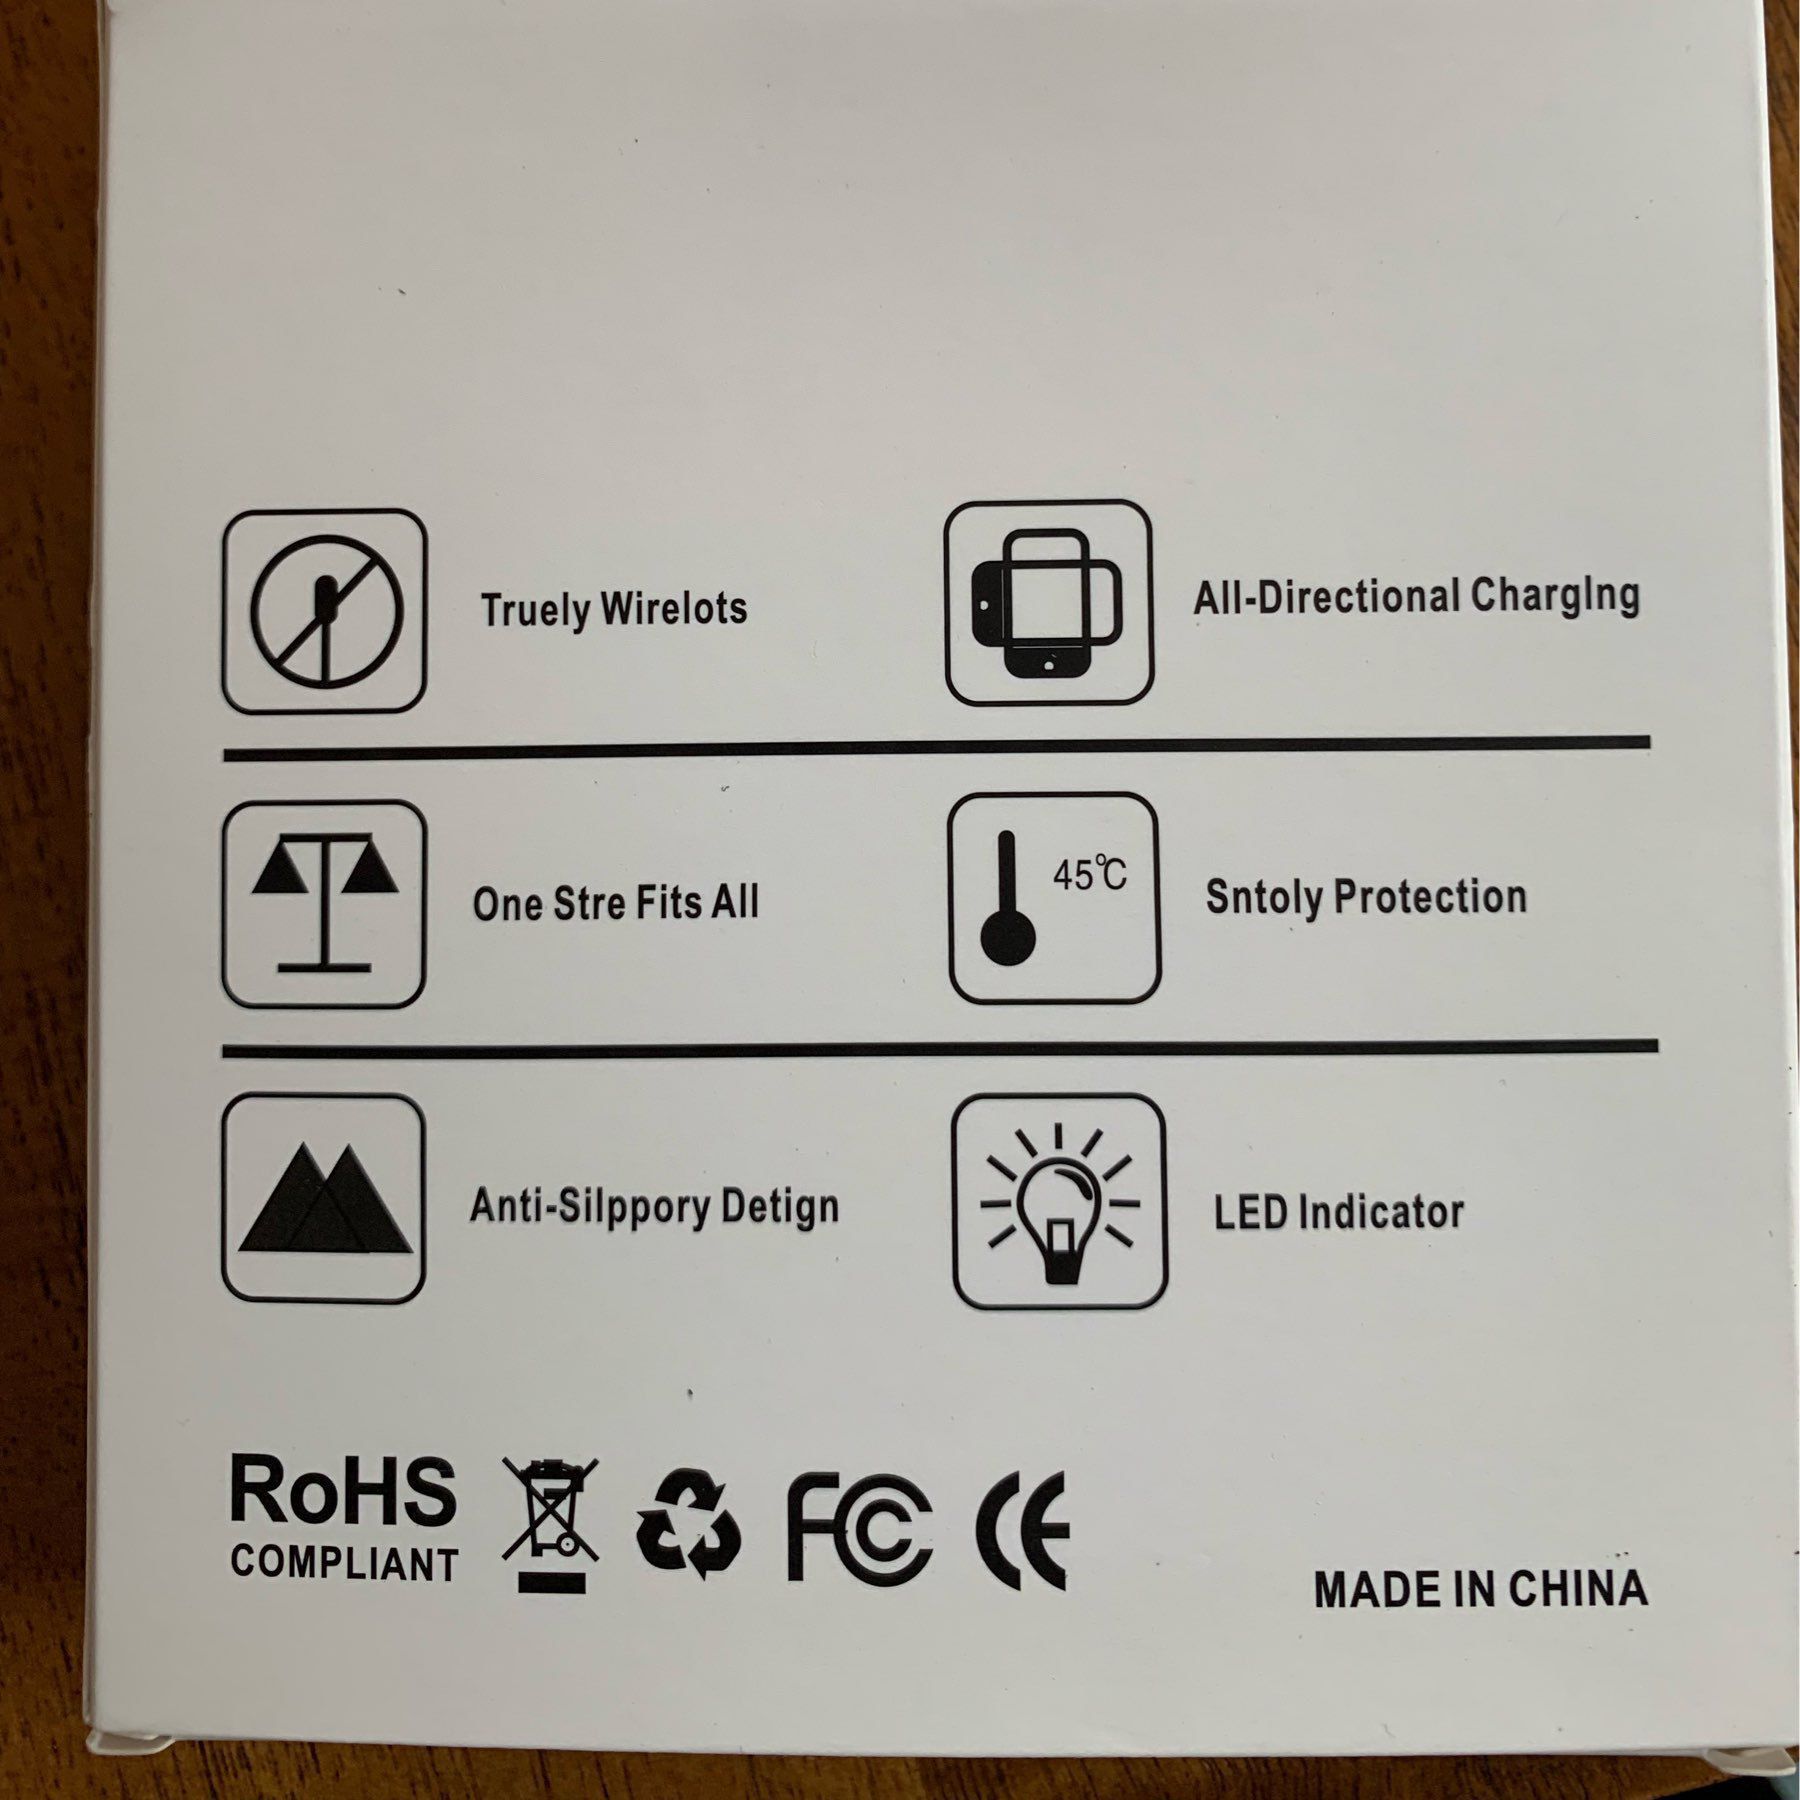 The back of a budget wireless charger box for my iPhone. with features like "Truely Wirelots" "One Stre Fits All" and "Sntoly Protection".